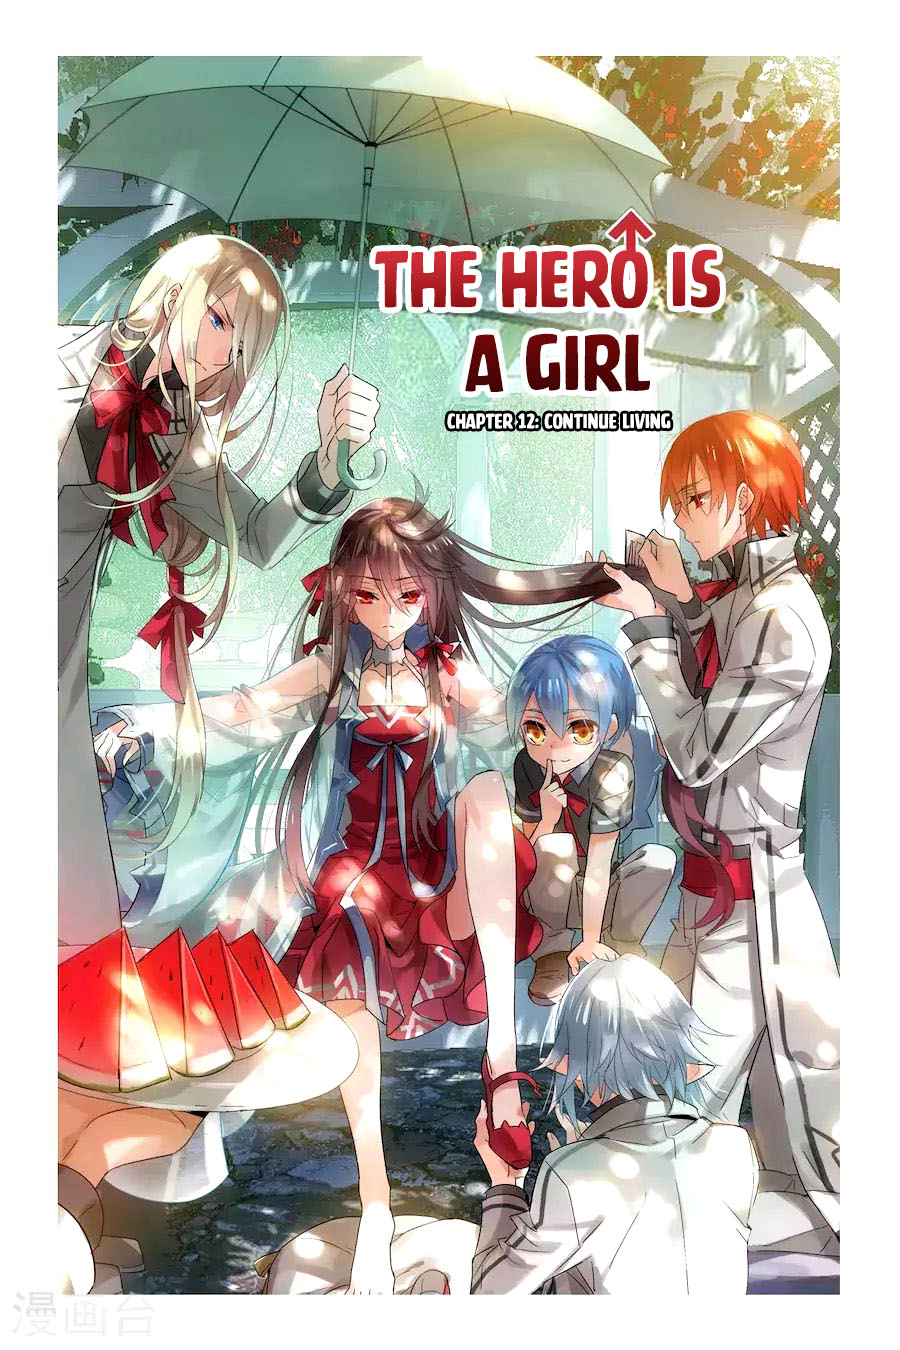 The Hero is a Girl?! Ch. 12 continue living